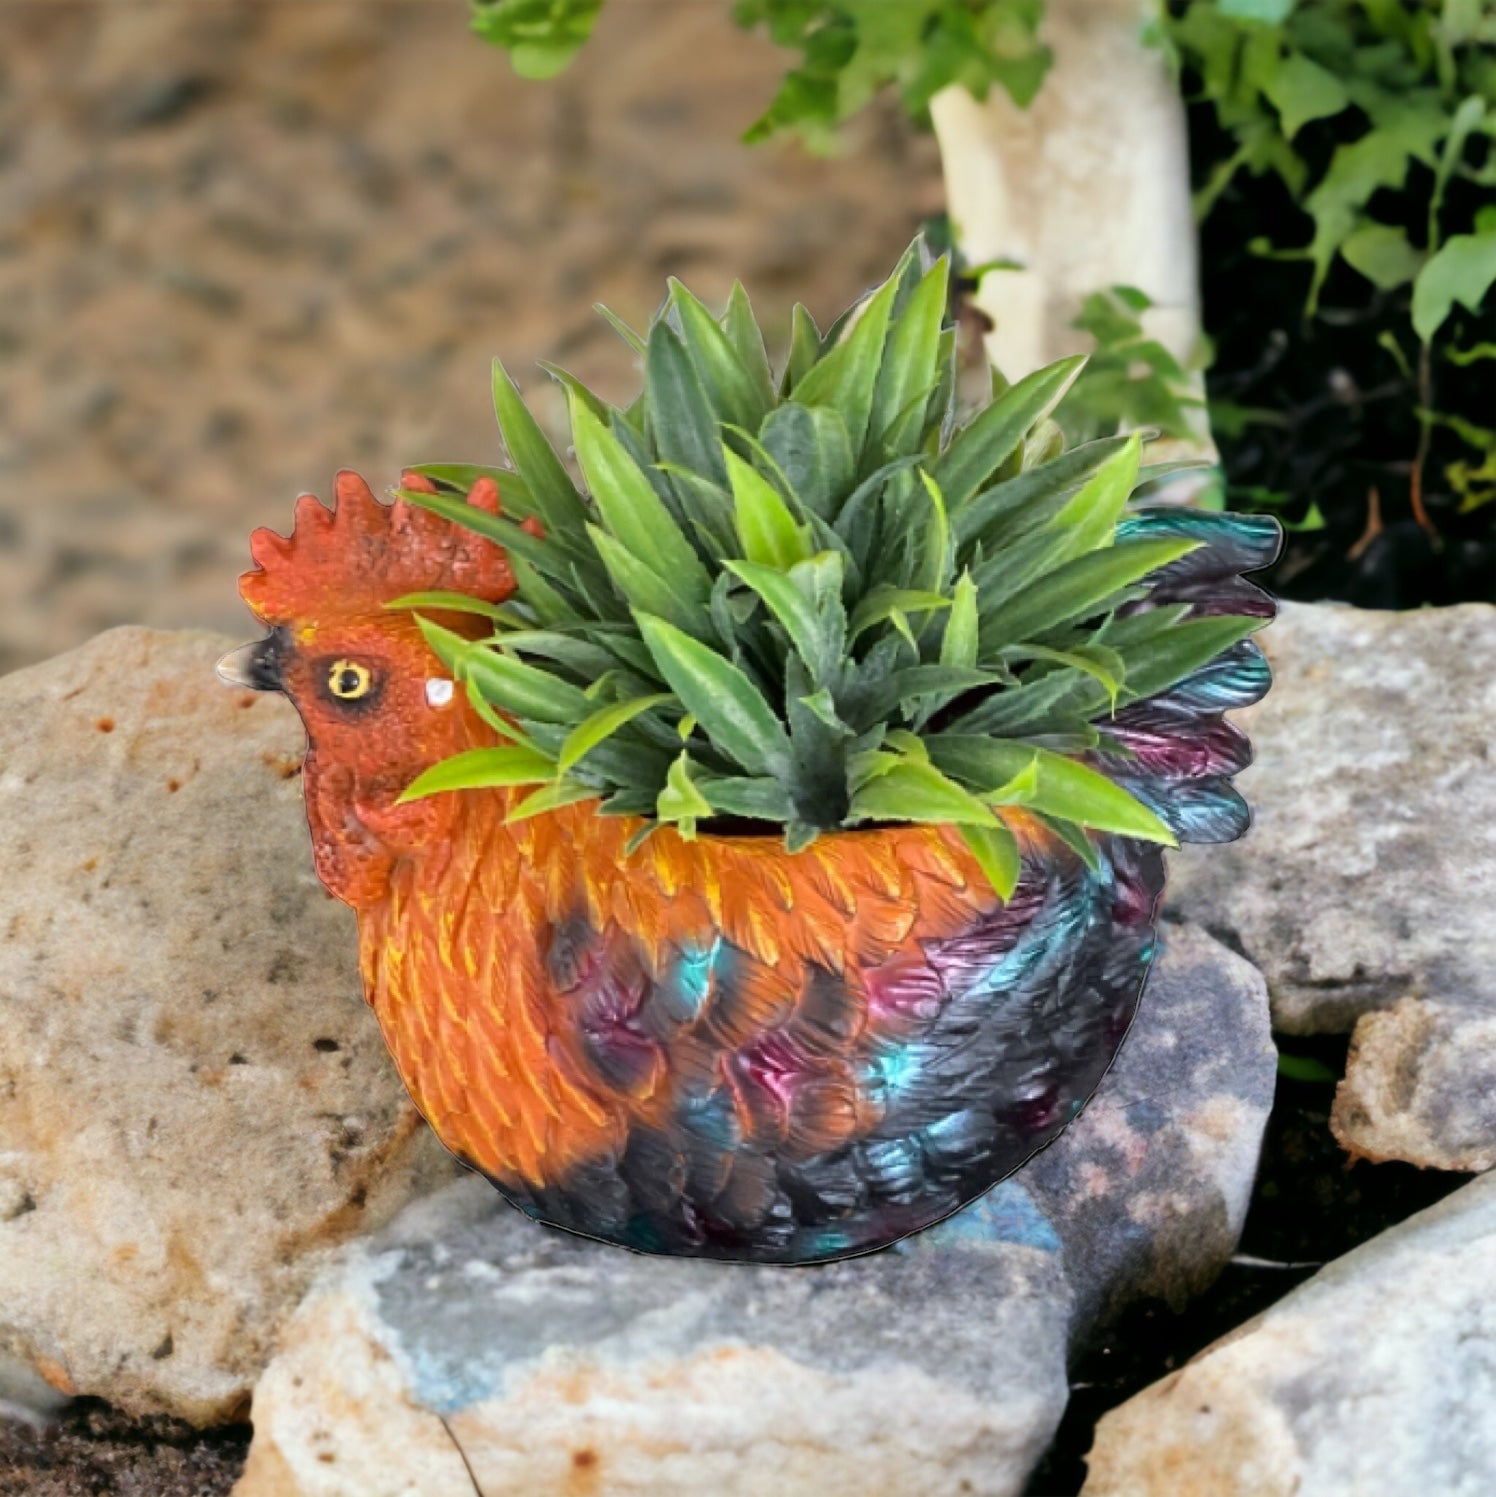 Plant Pot Planter Rooster Country - The Renmy Store Homewares & Gifts 